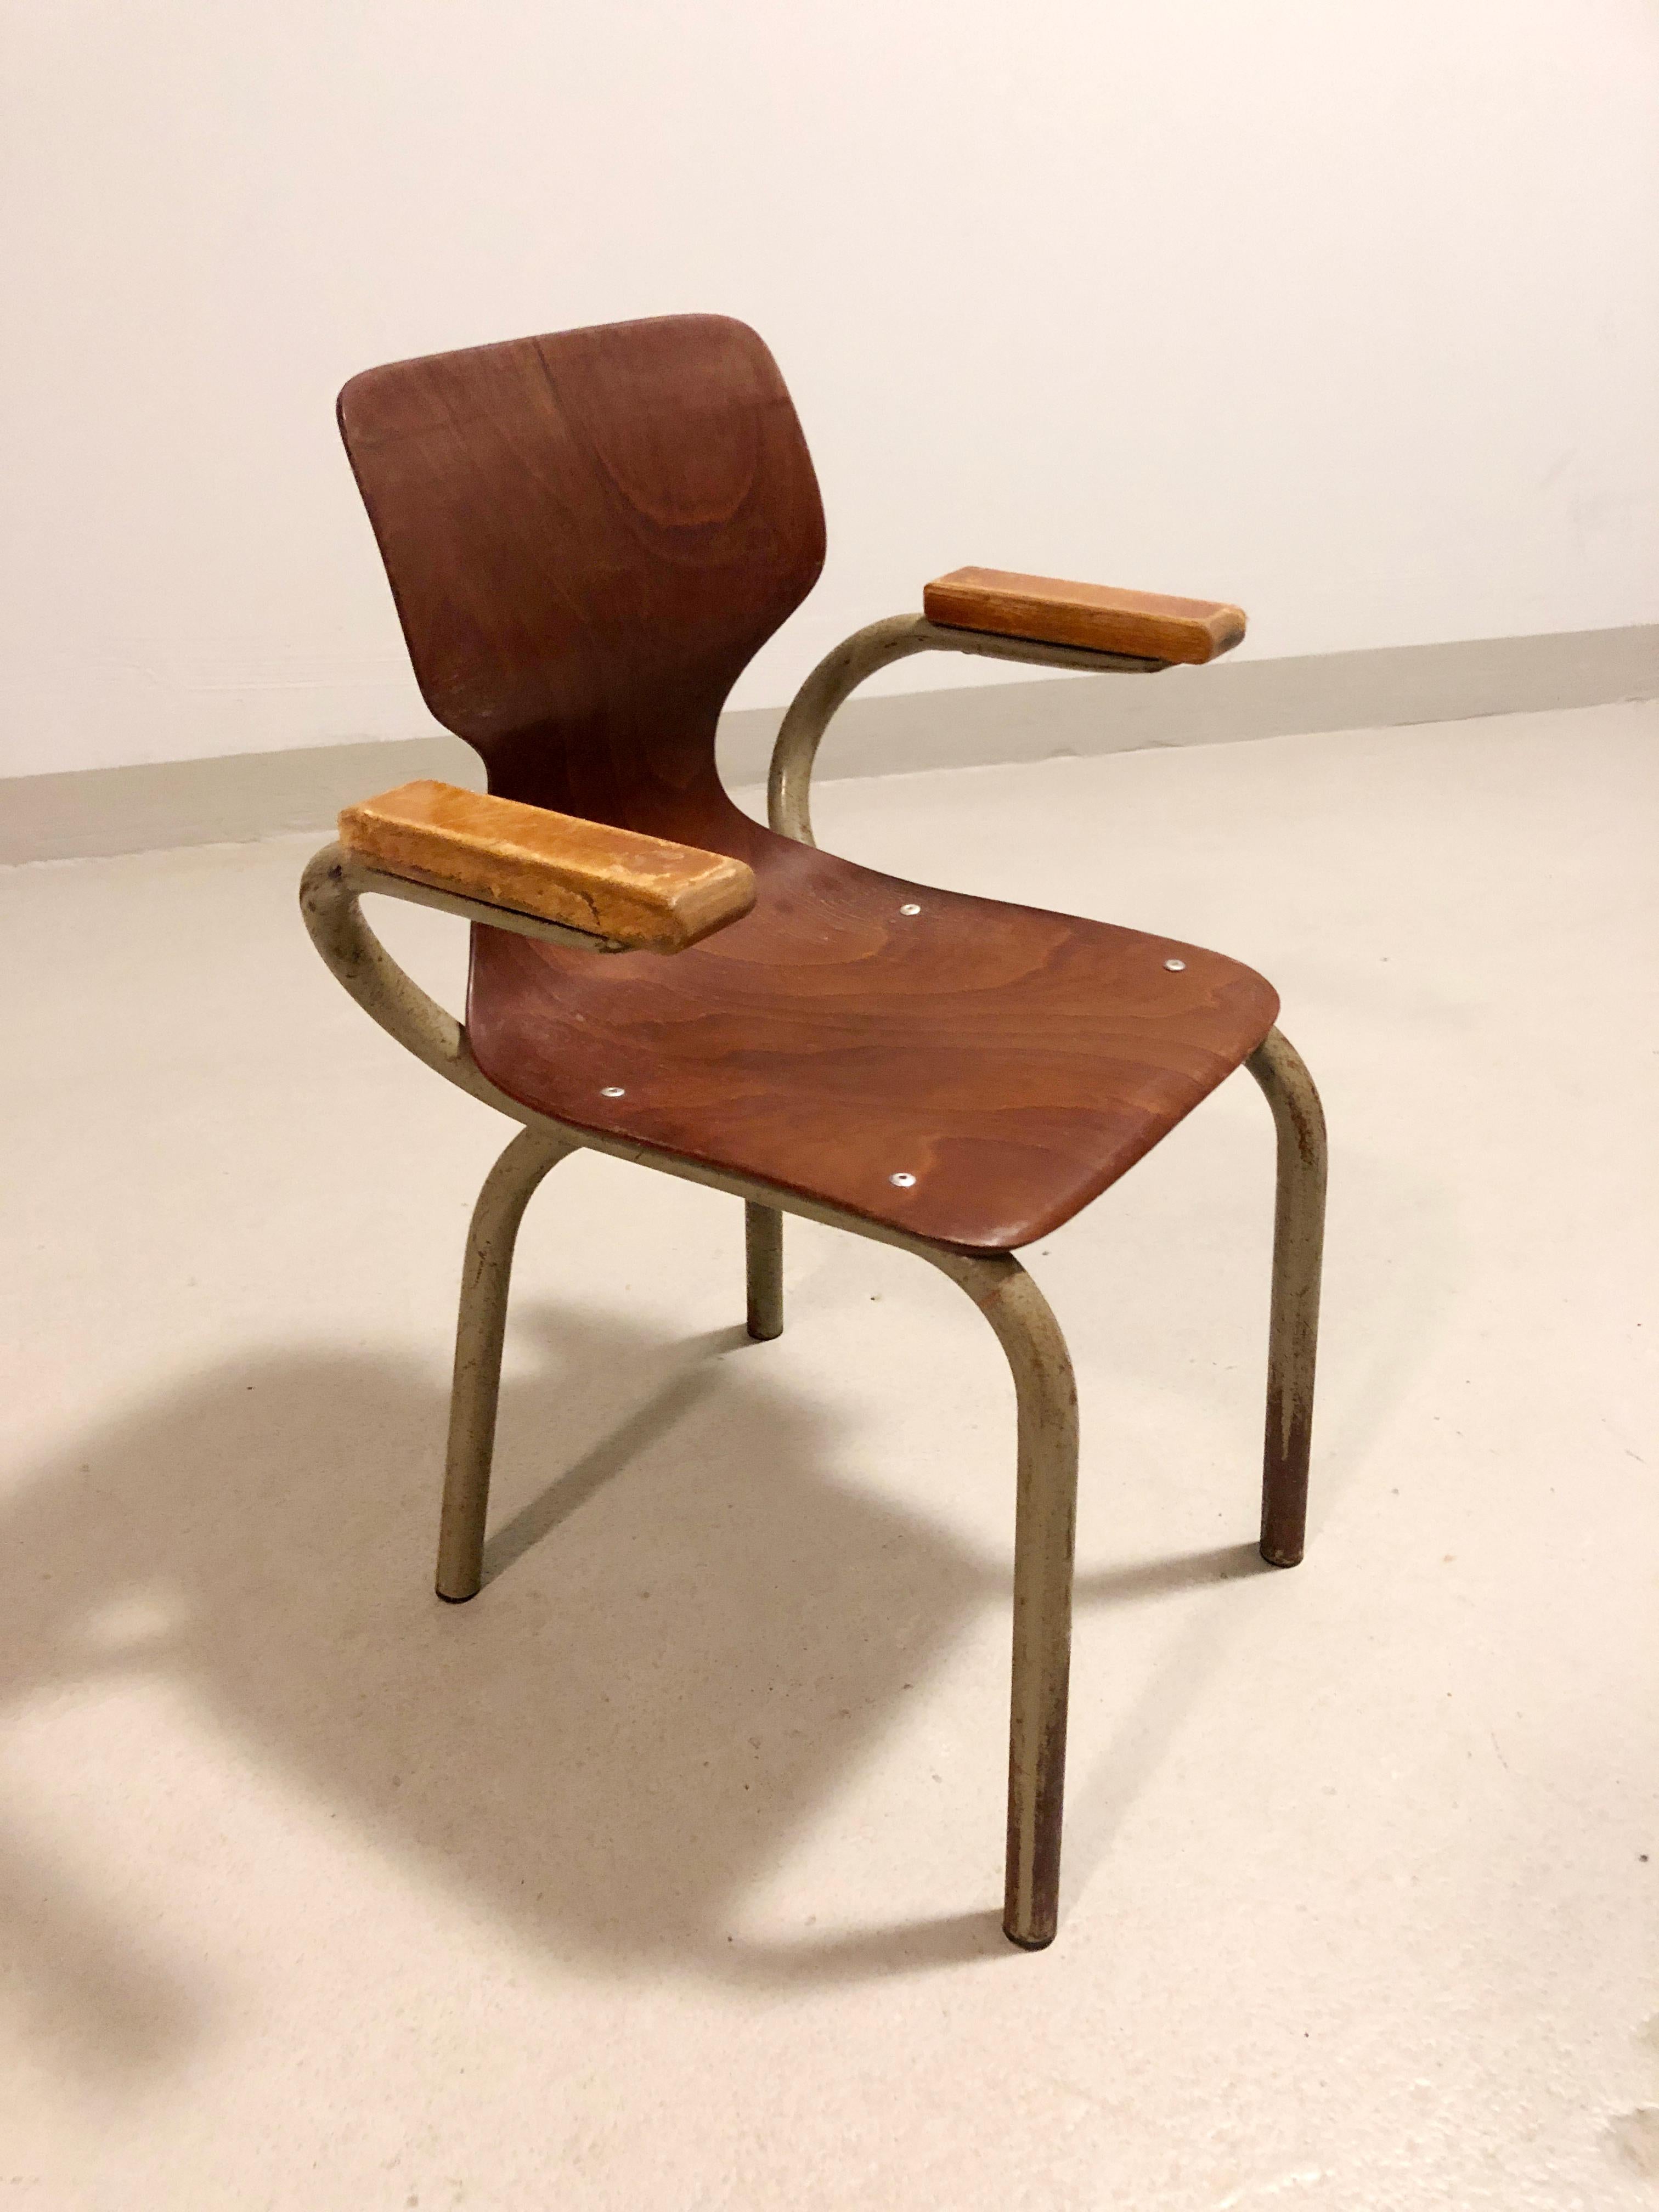 4 Industrial kids chair with plywood/pagholz seat
Tubax Belgium 70's - By Willy van der Meeren.

In good vintage condition no structural issues, very solid design.
With original manufacturing year and Tubax codes/info under the seats.
Original